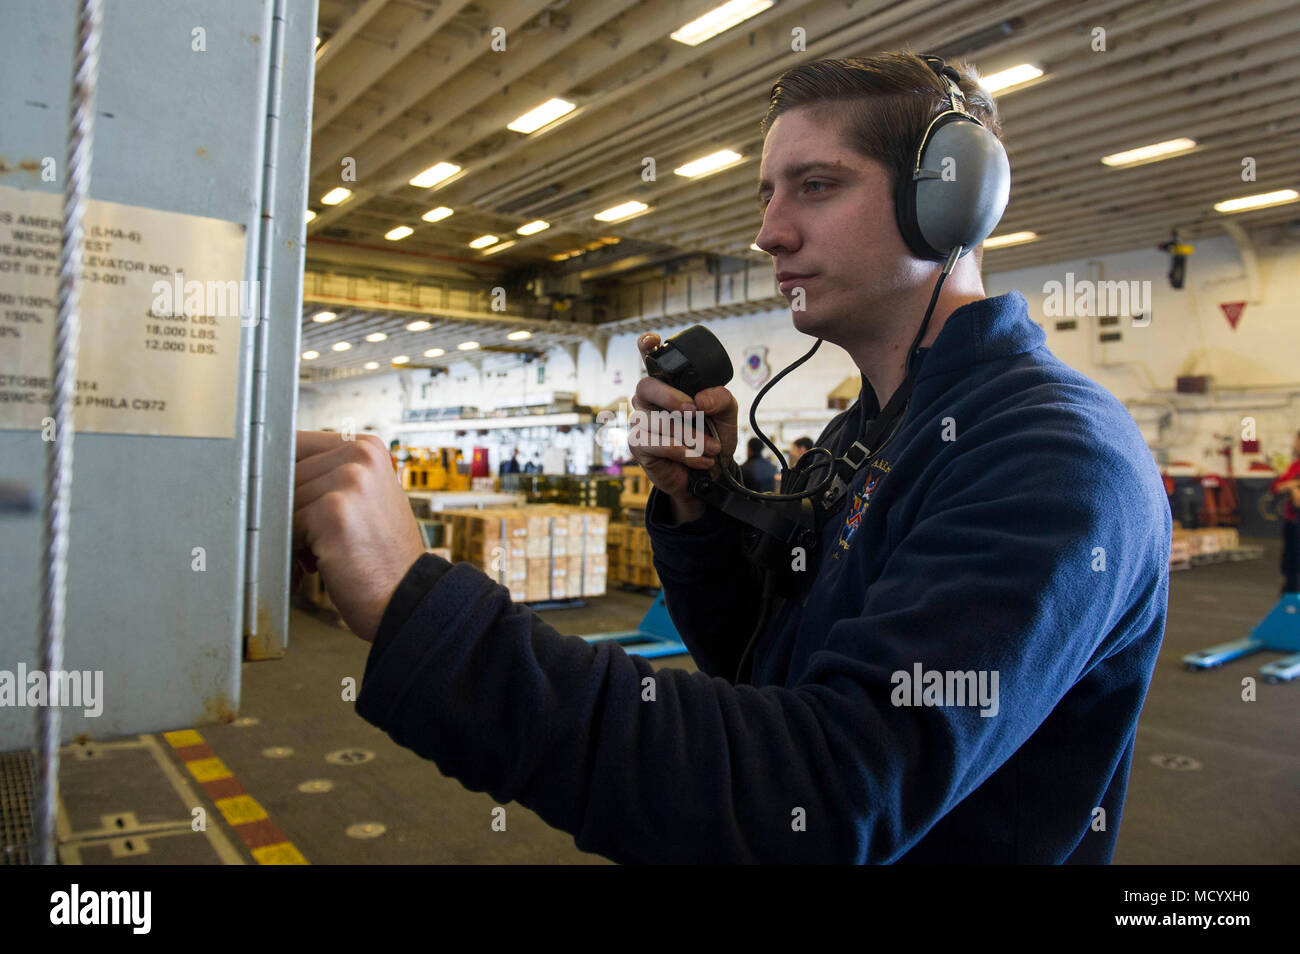 180306-N-ZS023-028 PACIFIC OCEAN (March 6, 2018) Aviation Ordnanceman Airman Jonah Getz, a Phoenix native, assigned to the amphibious assault ship USS America (LHA 6), communicates with the flight deck using a sound-powered telephone before transporting ordnance using the hangar bay elevator. America is underway off the coast of southern California conducting an ammunitions offload prior to entering a planned maintenance availability period. (U.S. Navy photo by Mass Communication Specialist 3rd Class Vance Hand/Released) Stock Photo